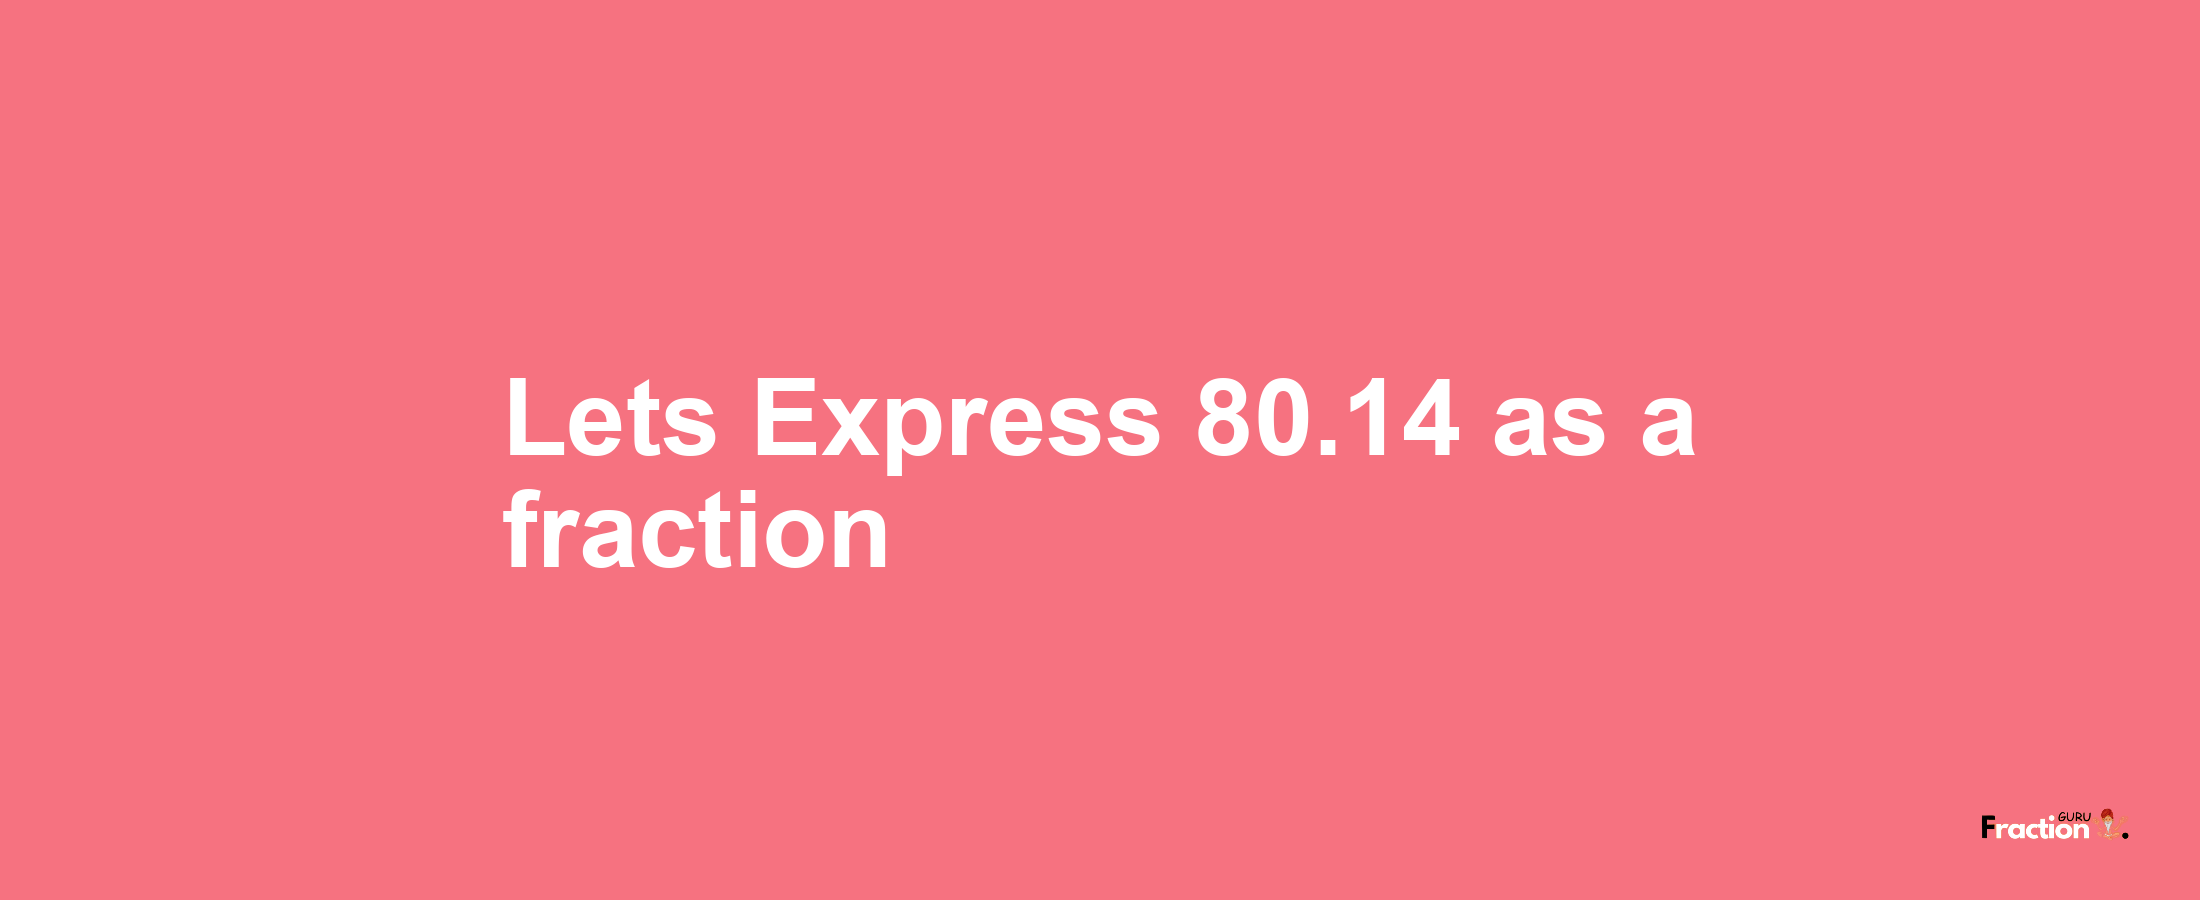 Lets Express 80.14 as afraction